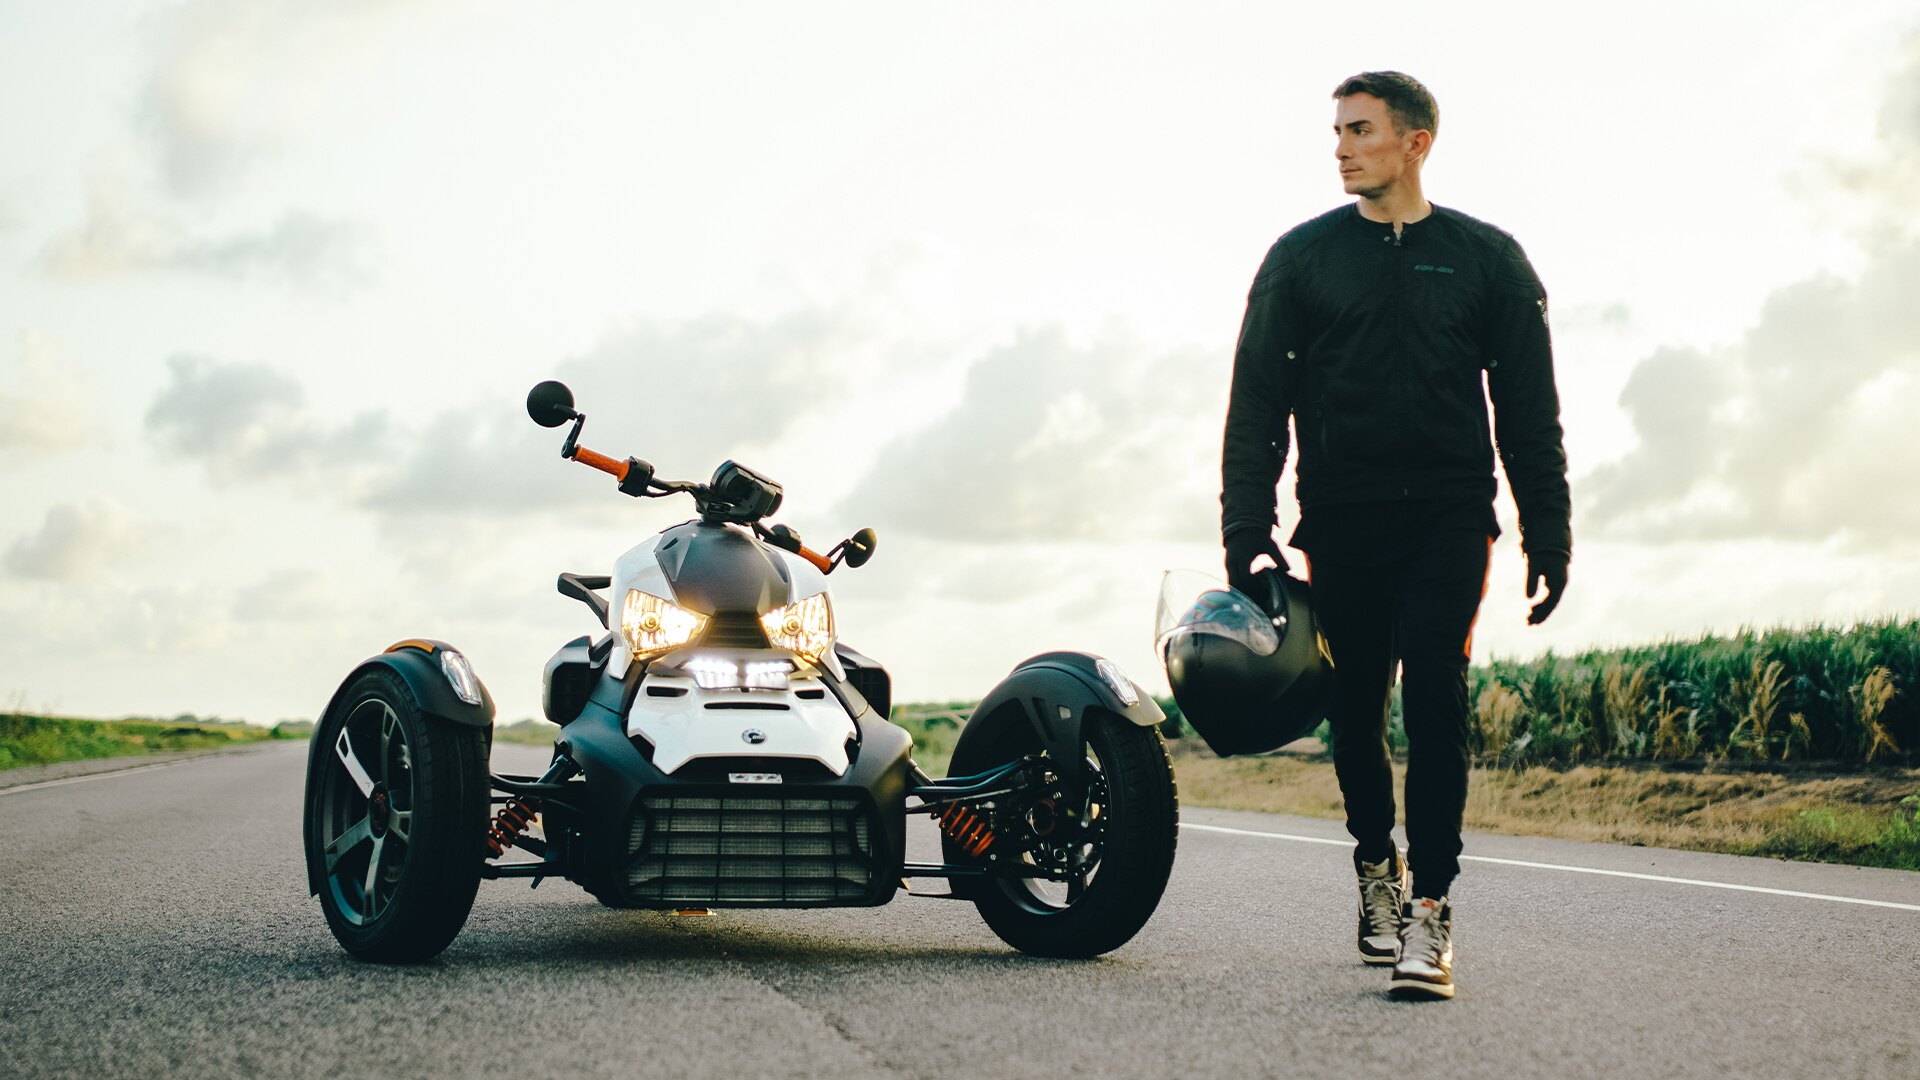 On-Road Ambassador Maxx Chewning is all geared up for a ride on his Can-Am 3-wheel ride